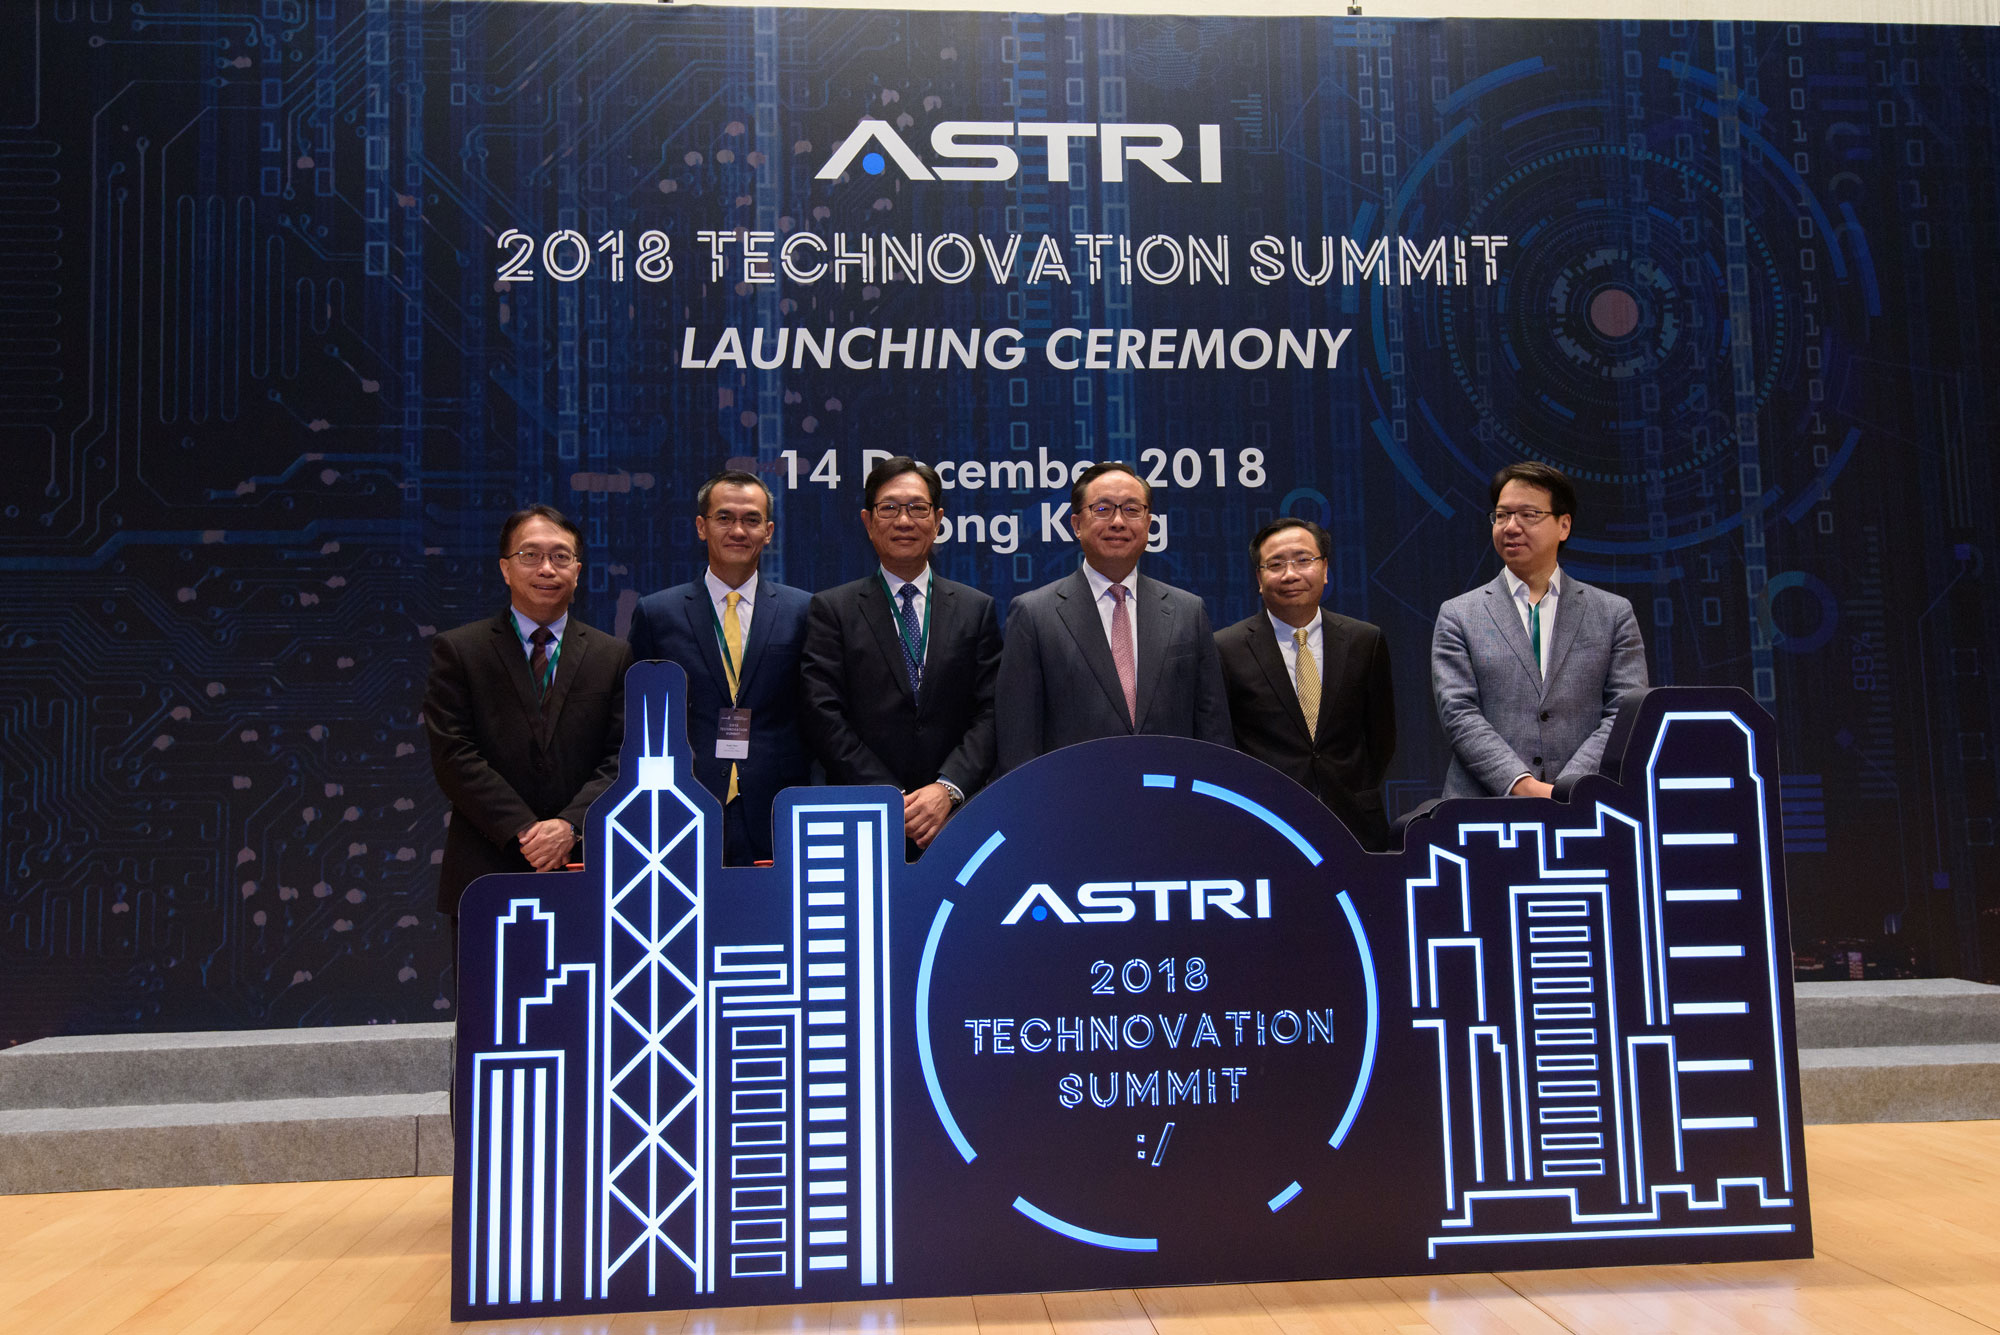 Mr. Jason Pun, Assistant Government Chief Information Officer (Cyber Security & Digital Identity), joins Launching Ceremony at the "ASTRI Technovation Summit".